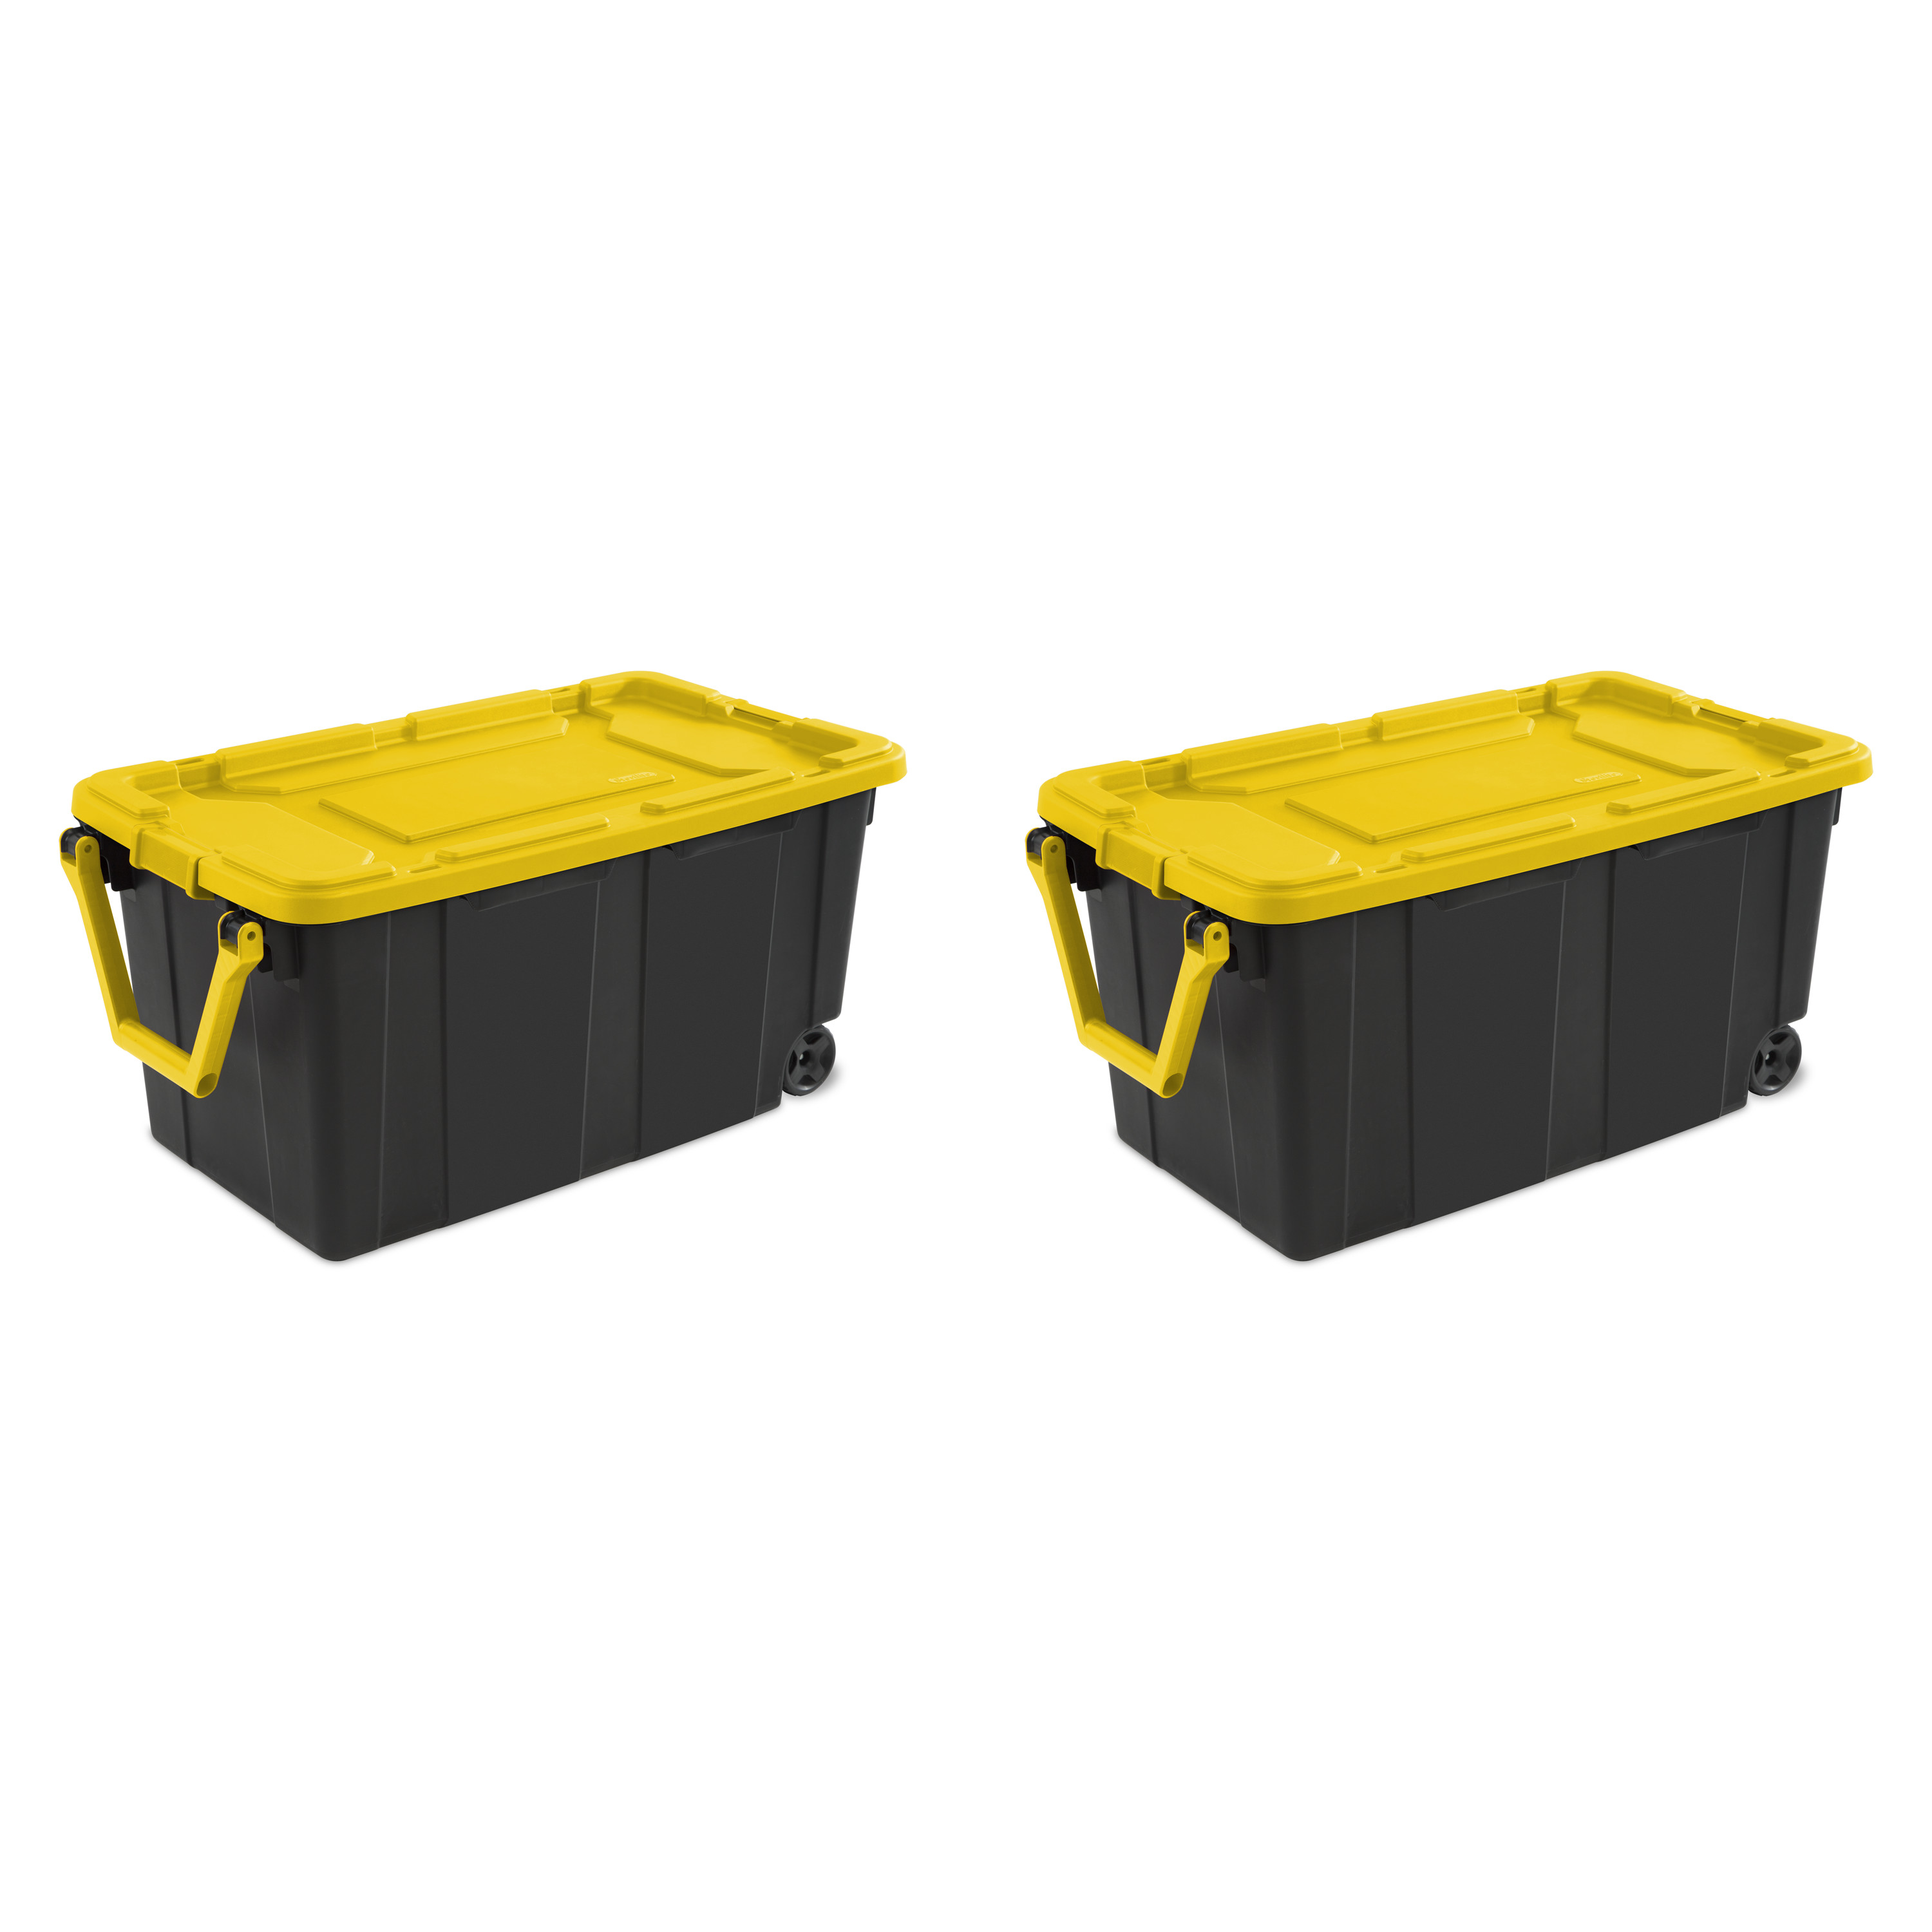 Sterilite Plastic 40 Gallon Wheeled Industrial Storage Tote Yellow Lily, Set of 2 - image 1 of 13